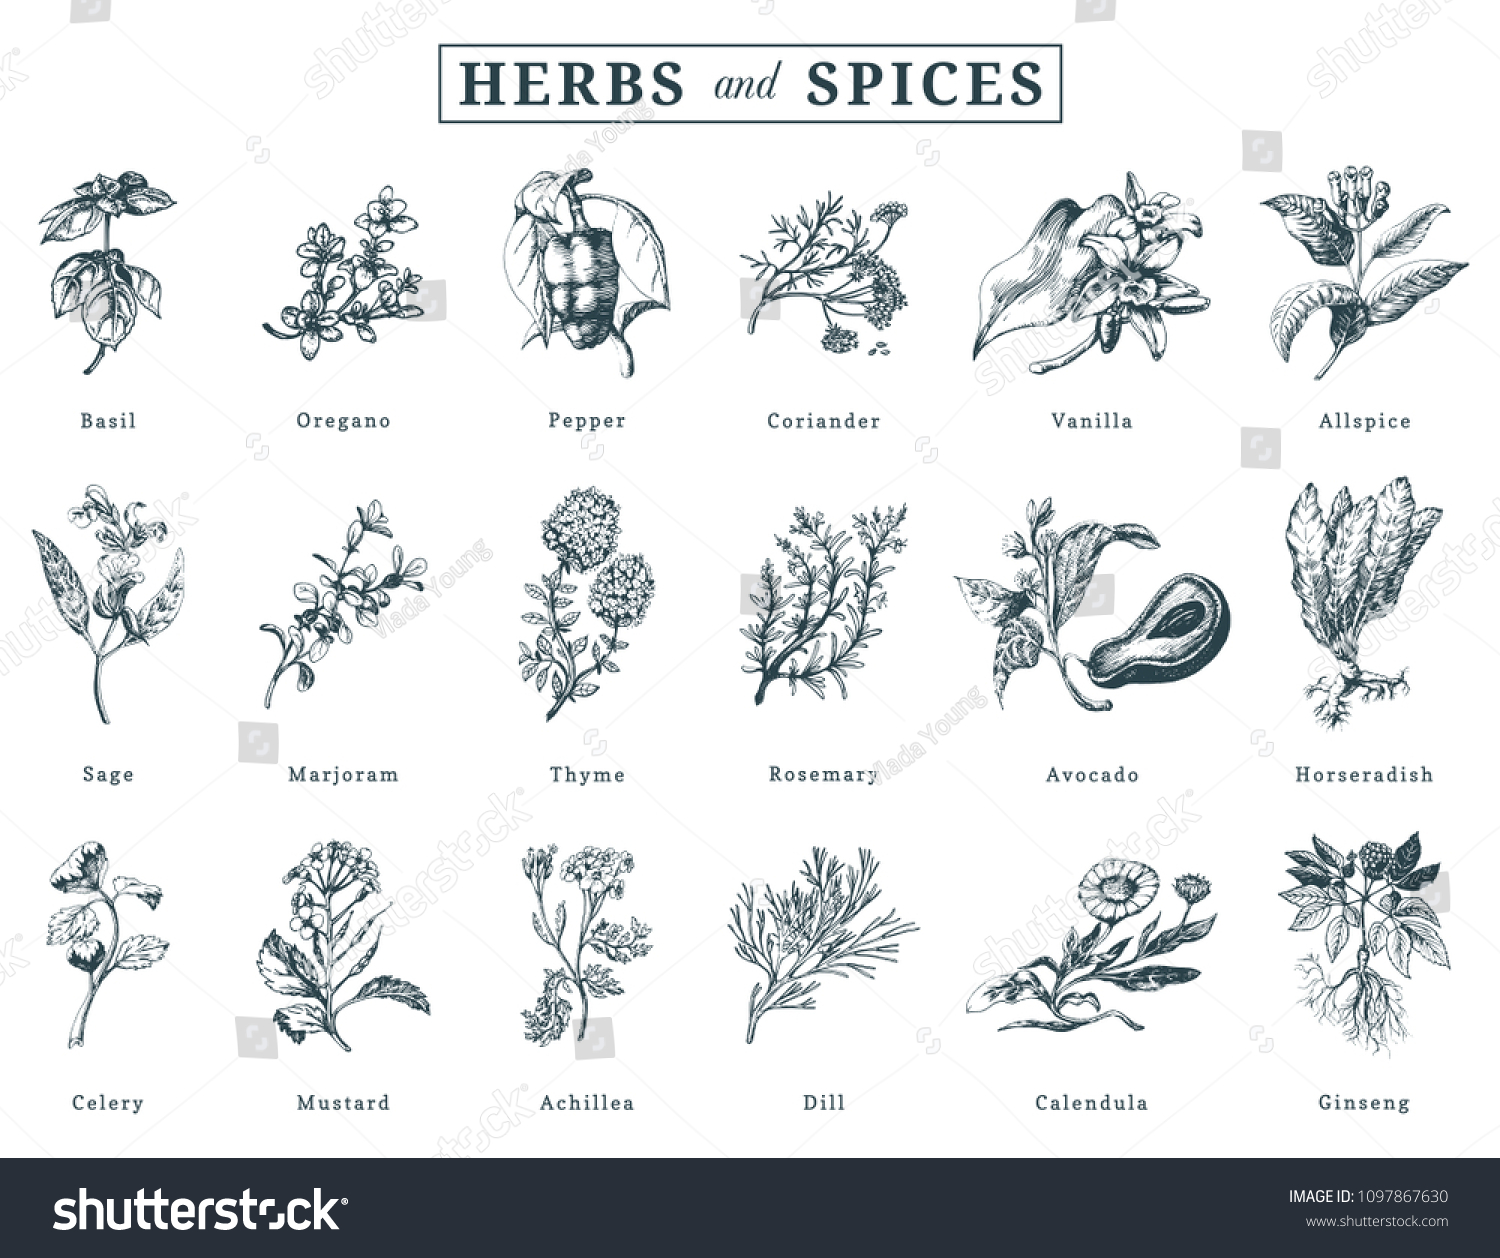 Drawn herbs and spices vector set. Botanical illustrations of organic, eco plants. Used for farm sticker, shop label etc. #1097867630